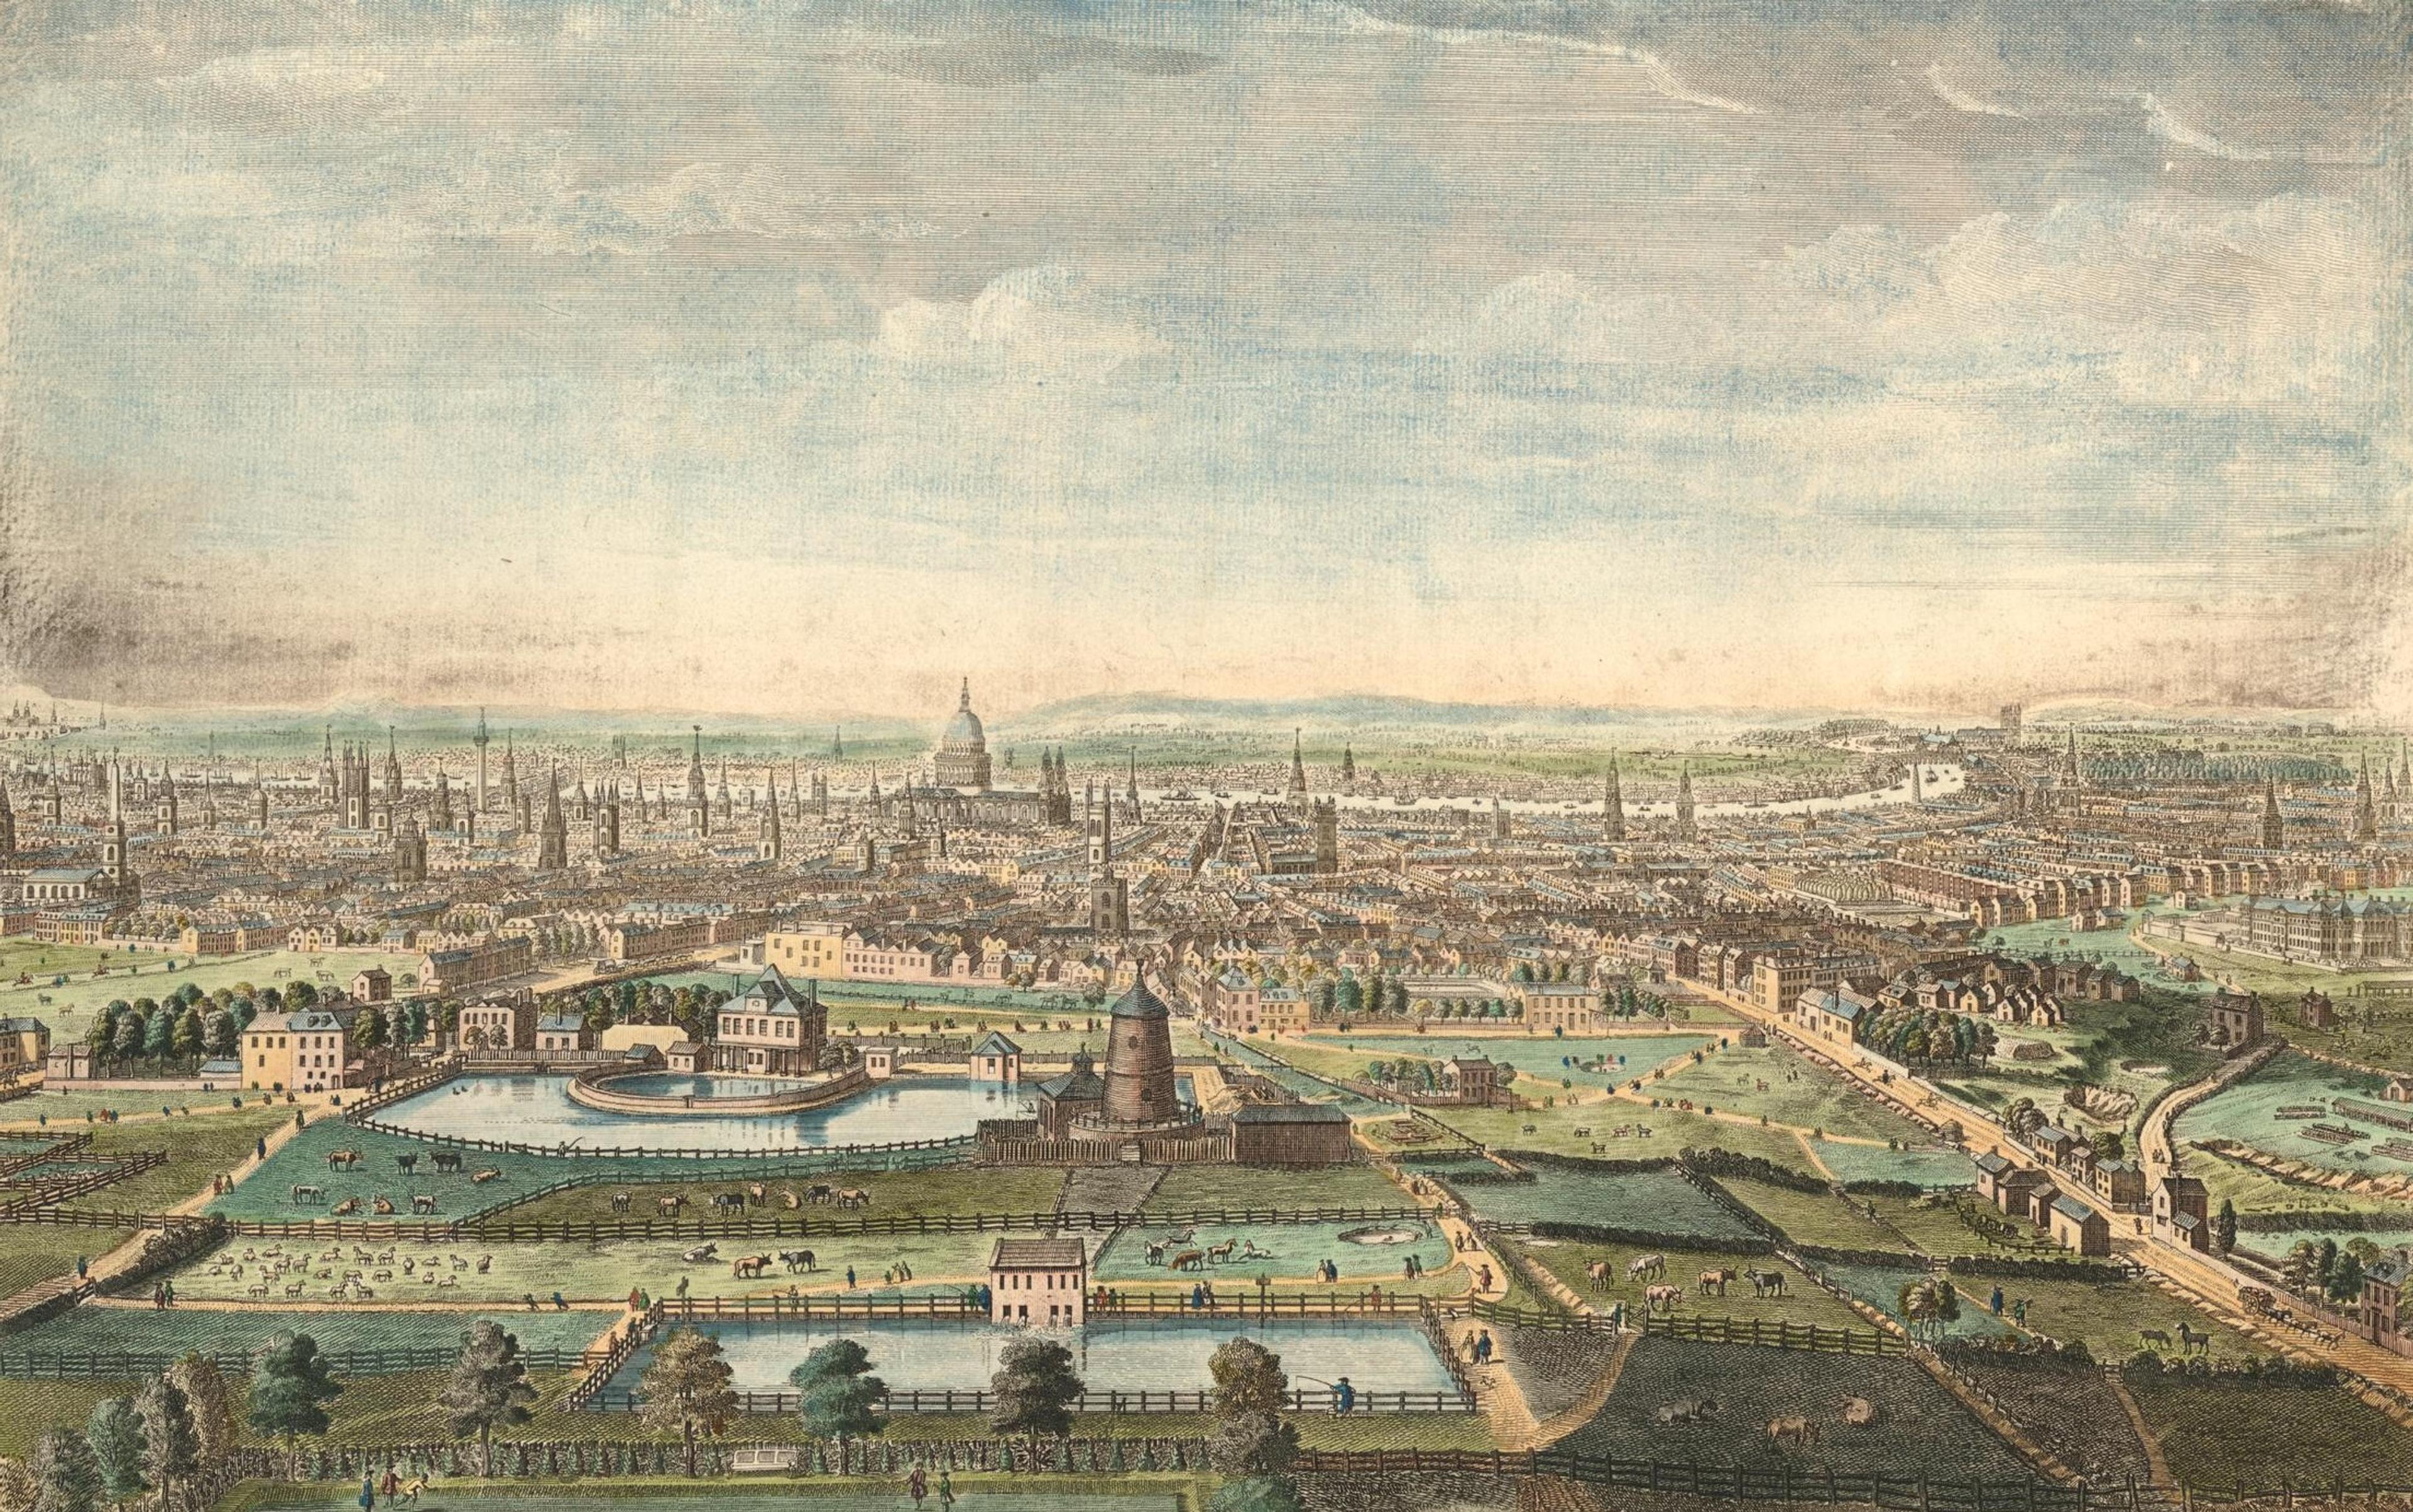 Coloured etching of a cityscape with rural landscape and ponds in the foreground and denser cityscape in the background towards the top of the image